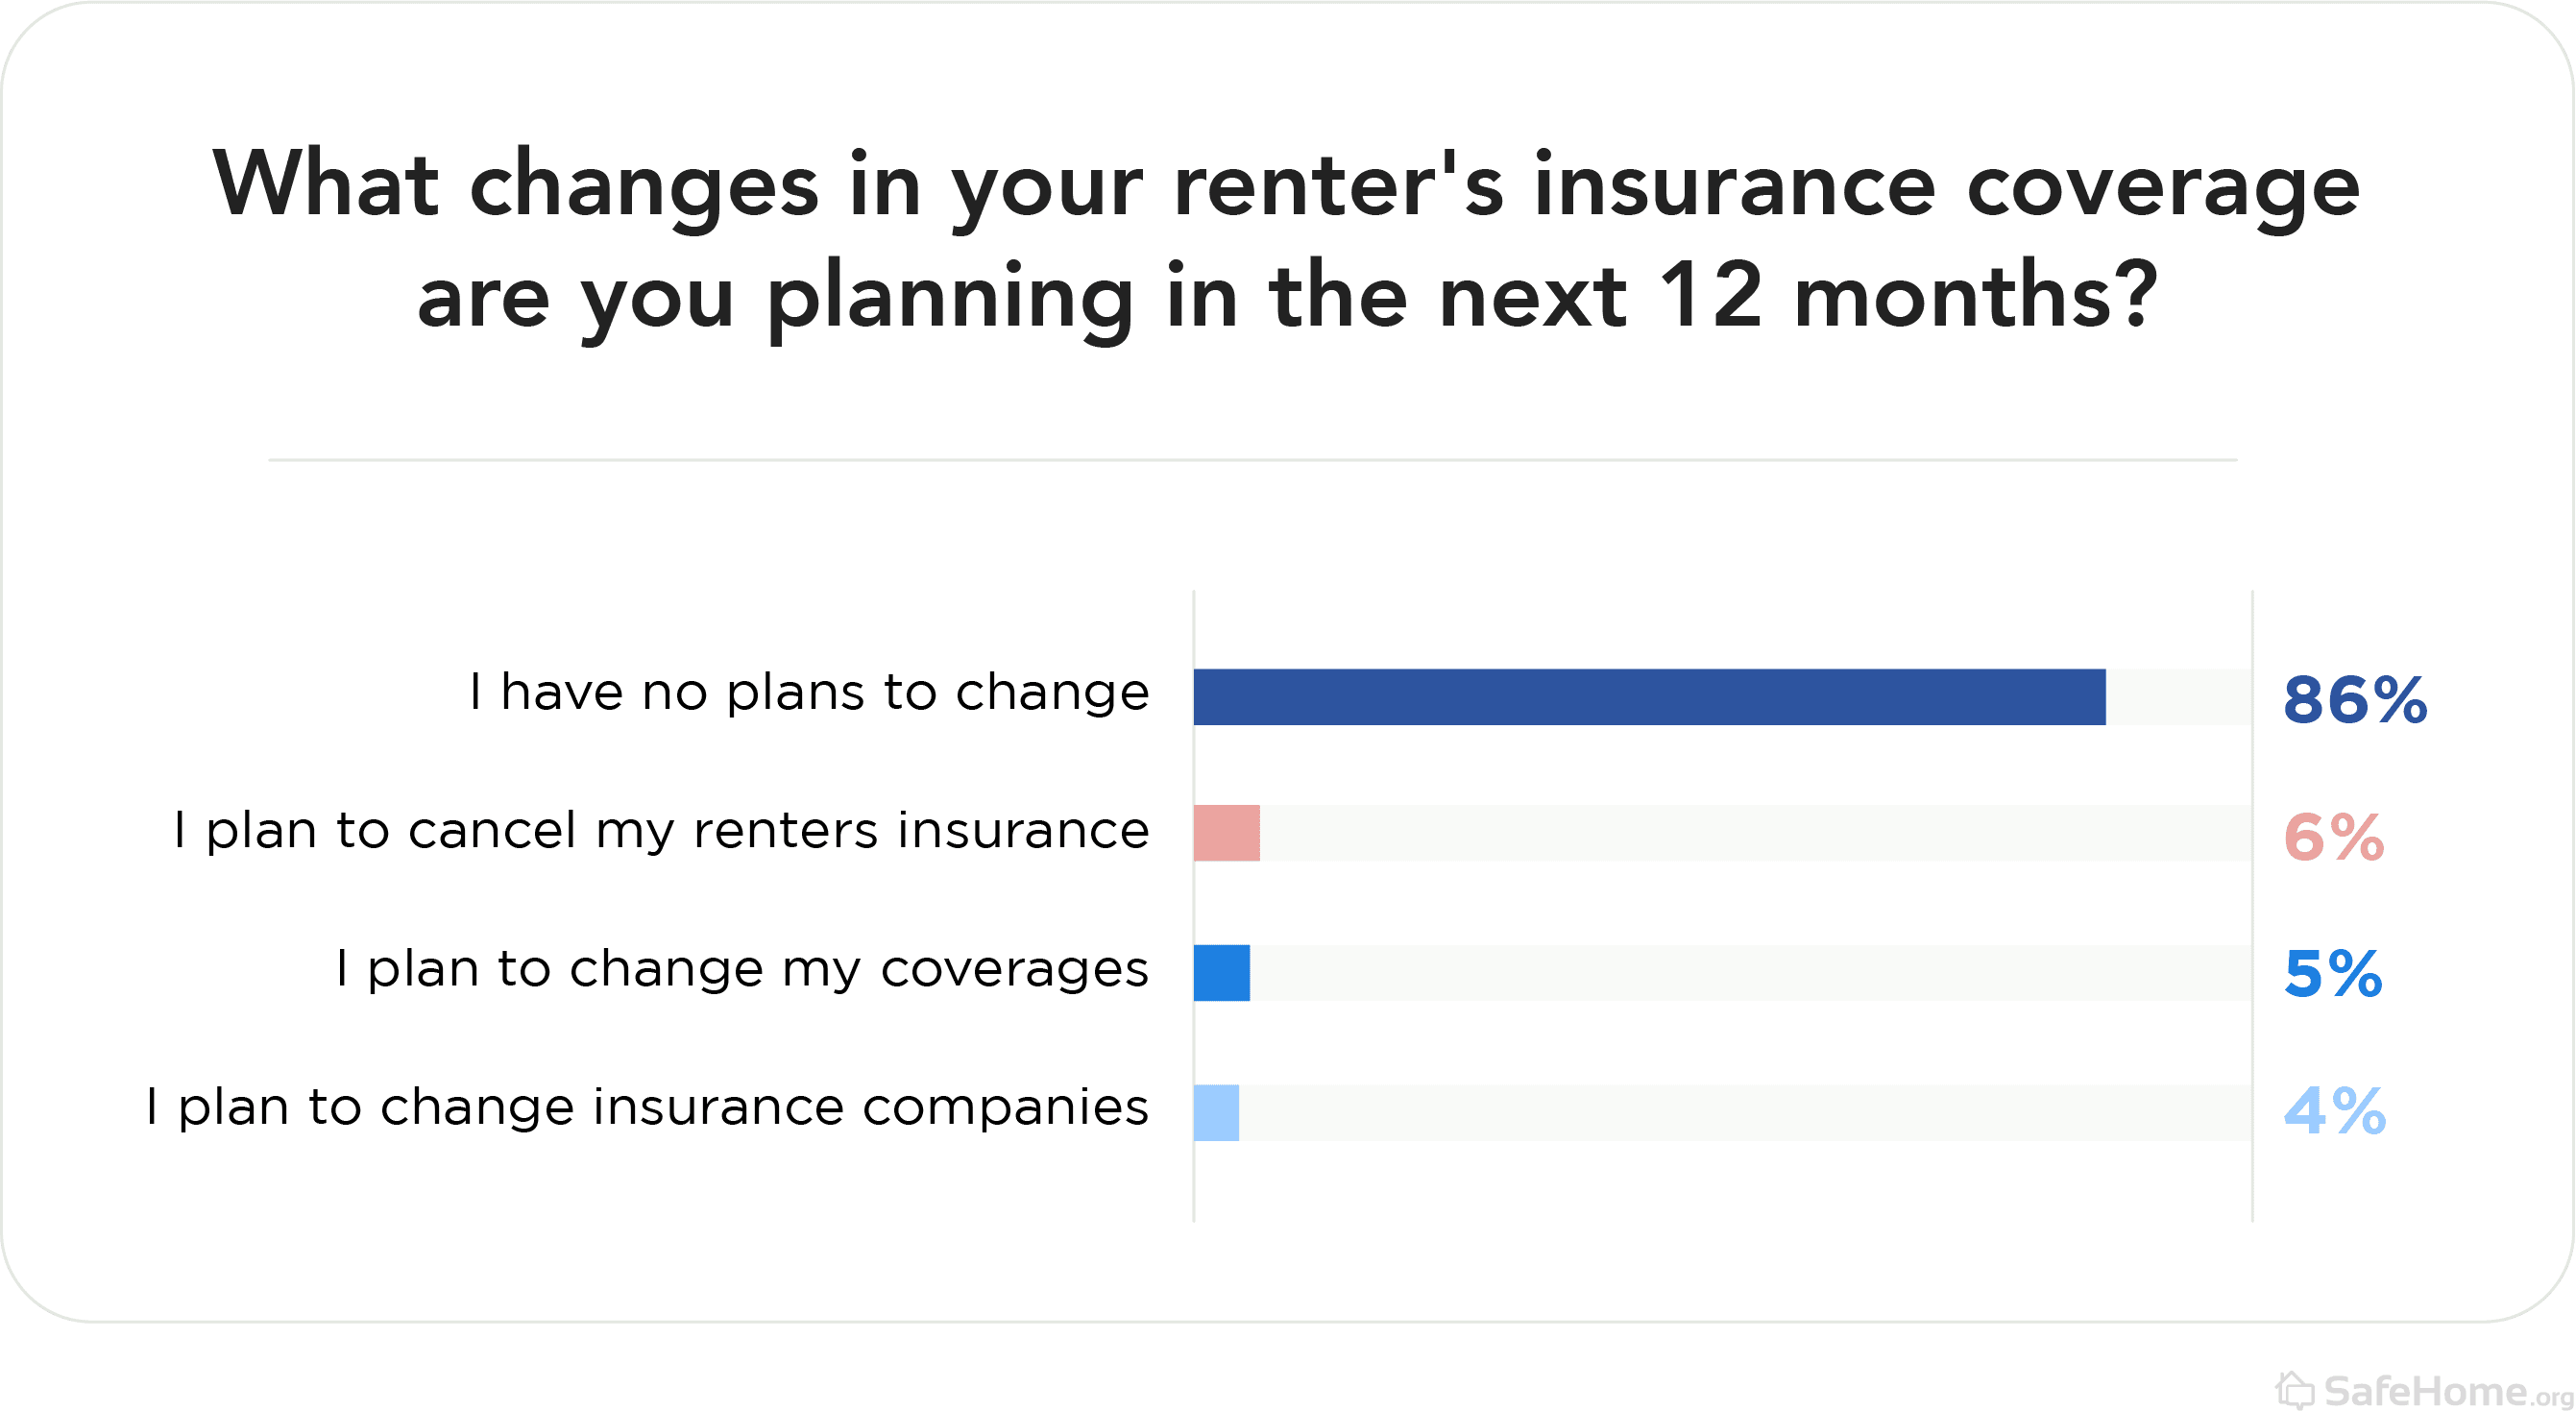 What changes in your renters insurance coverage are you planning in the next 12 months